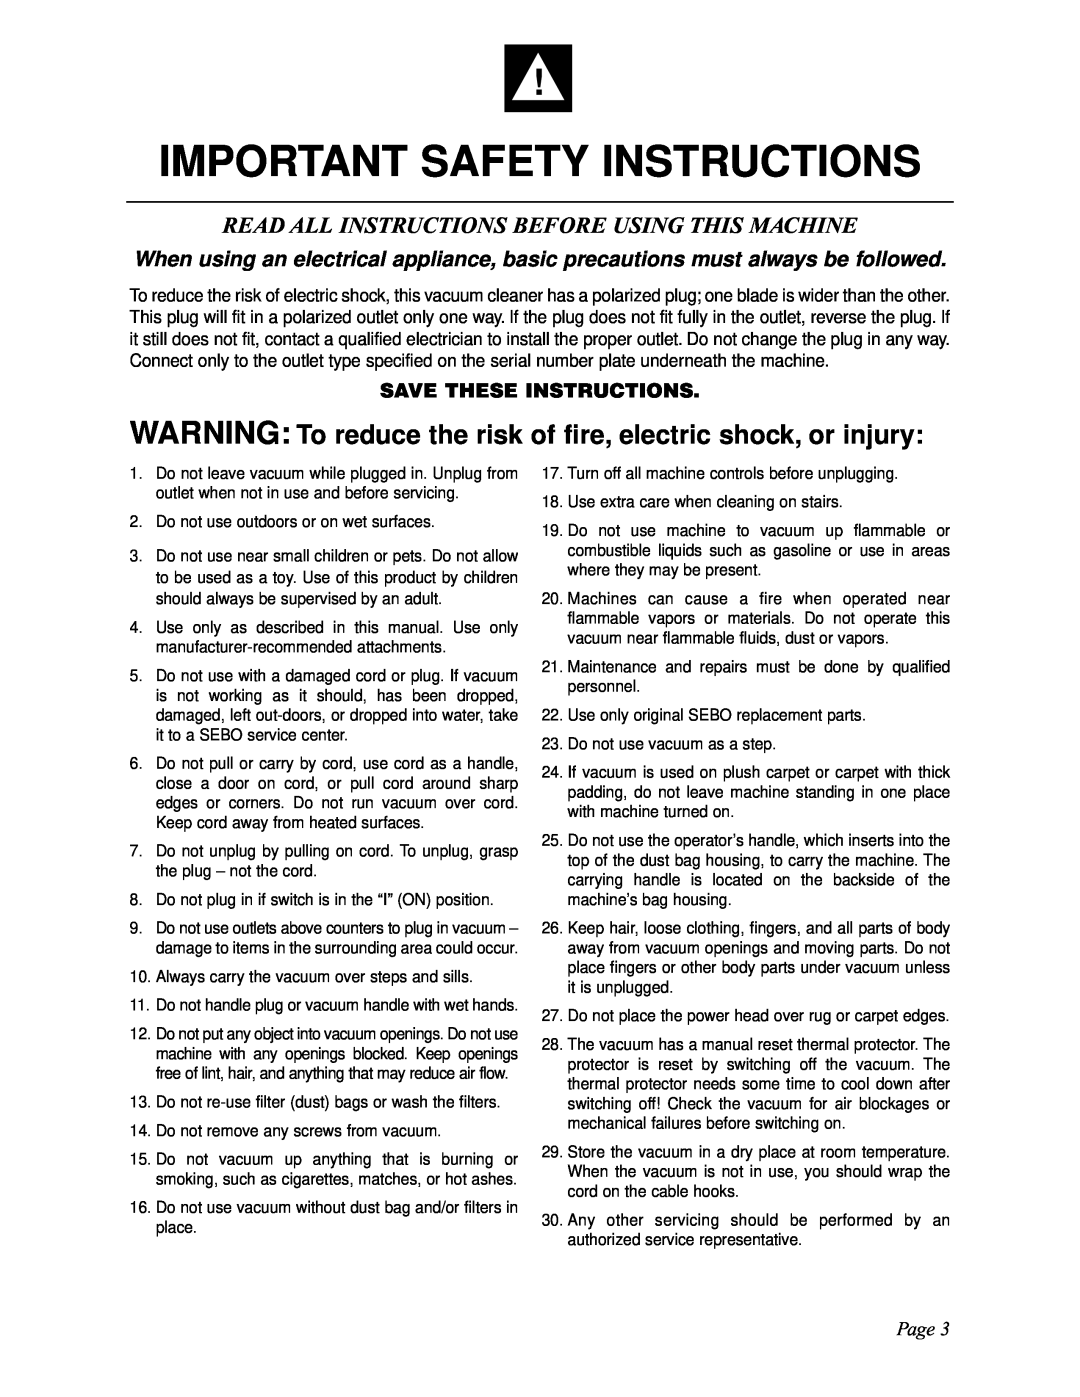 Sebo X4, X5 Important Safety Instructions, Read All Instructions Before Using This Machine, Save These Instructions, Page 